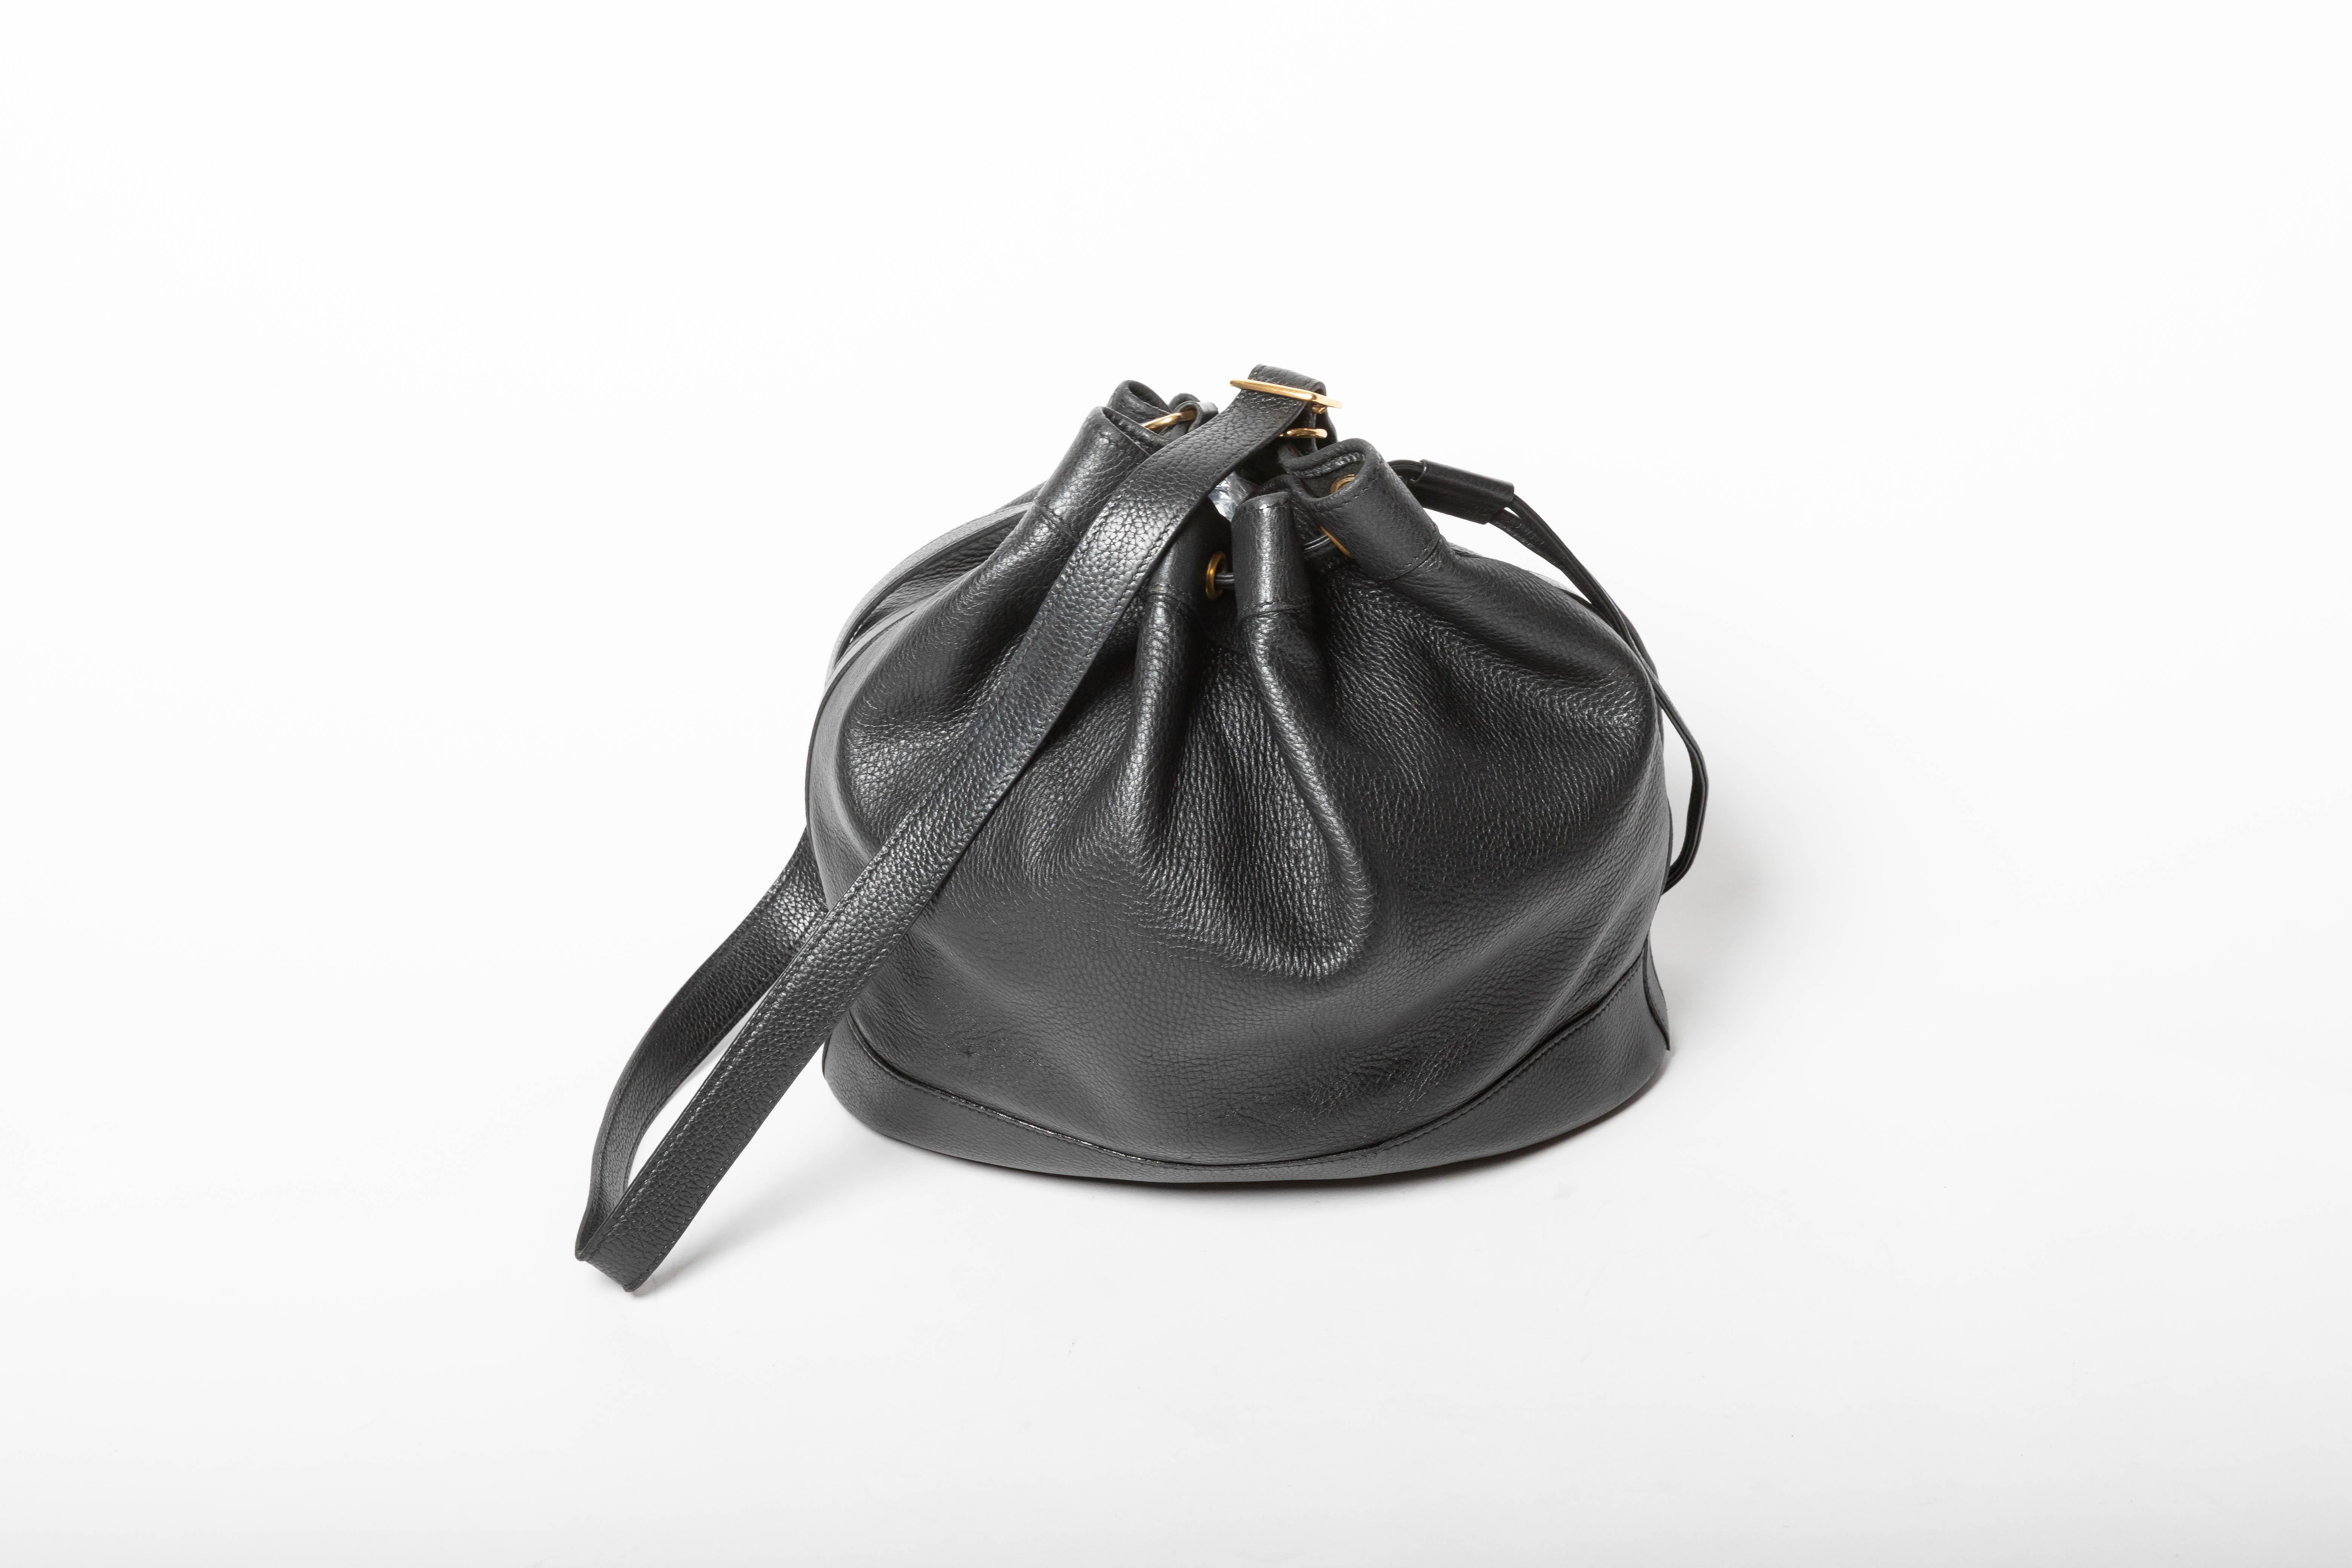 
This amazing Hermes bucket bag is in very good condition. The exterior features beautiful black leather trimmed with a gold buckle along the shoulder strap. The drawstring style closure opens to an unlined leather interior with enough storage space